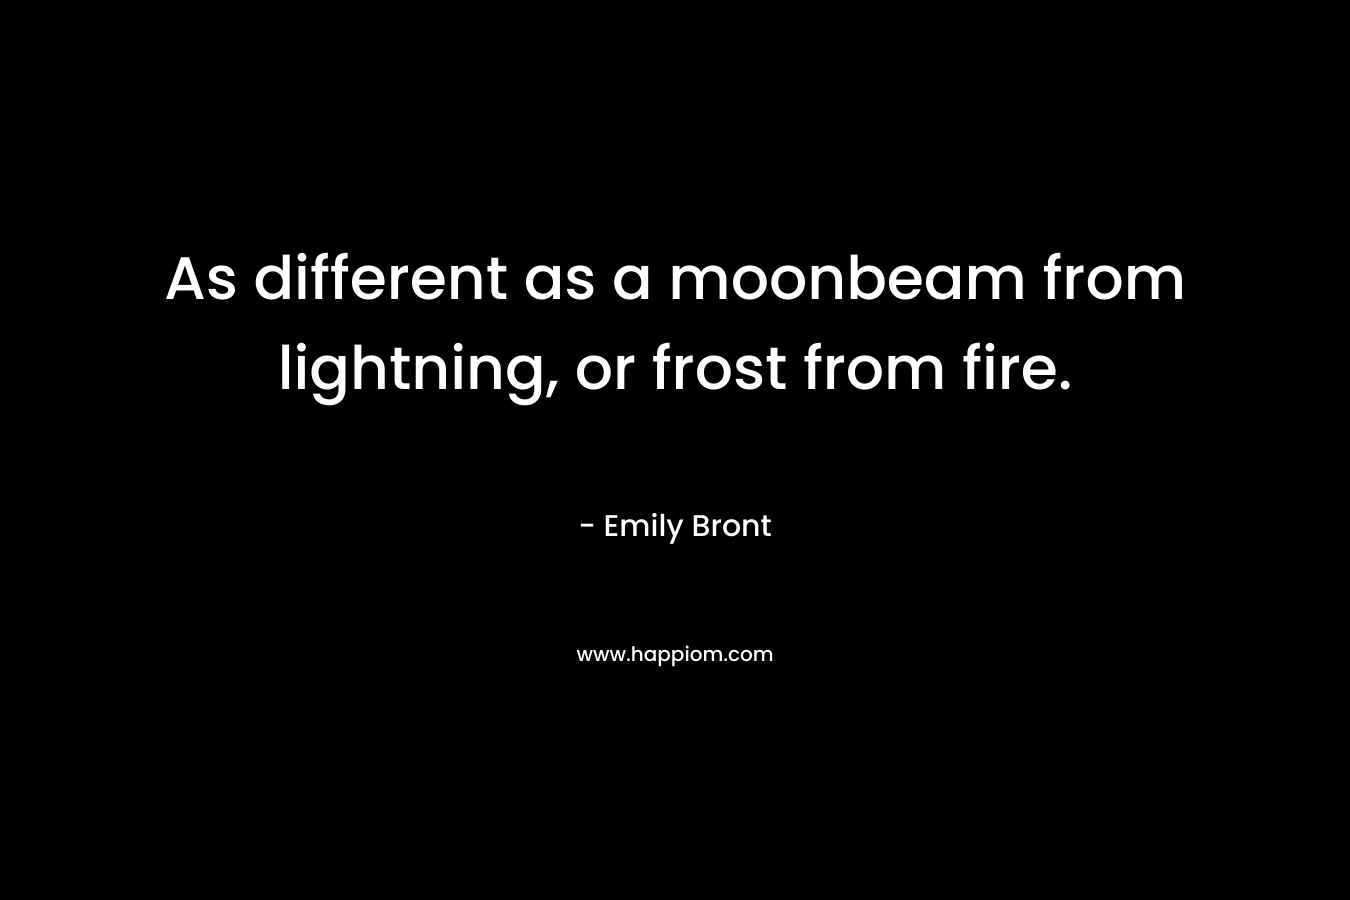 As different as a moonbeam from lightning, or frost from fire. – Emily Bront